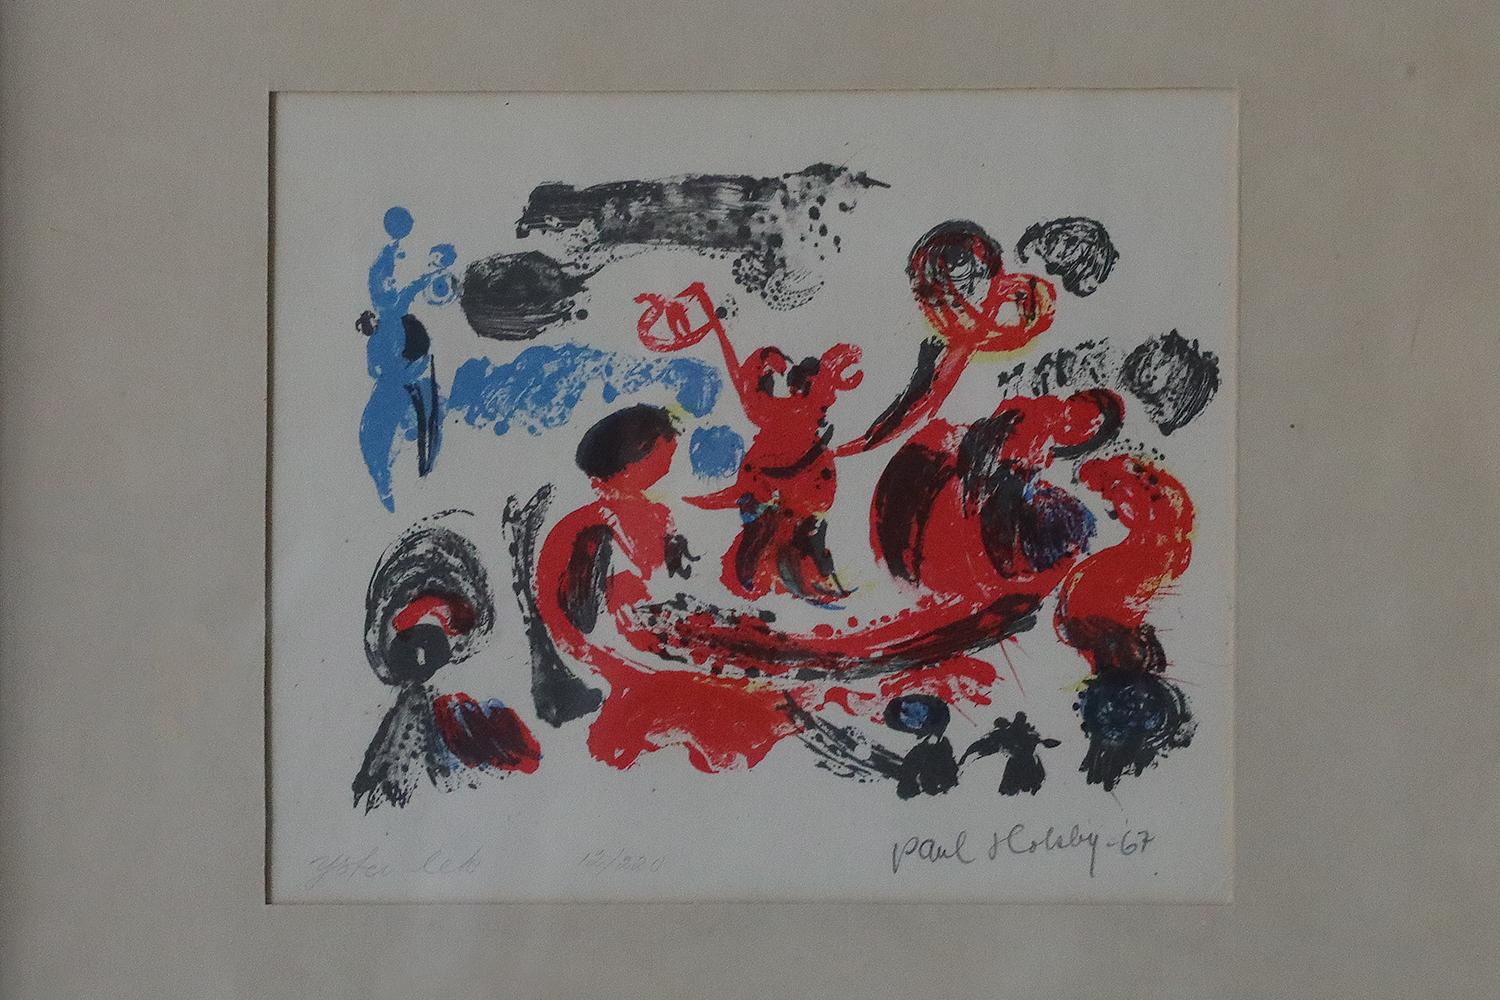 Paul Holsby, Yster lek, 1967
Color lithograph
Number 12/220
The work is signed by the artist, dated, titled and individually numbered (in pencil)
Working dimensions 23/29
The work is framed

Paul Holsby was born in 1921 in Norrtälje, died in 2007 in